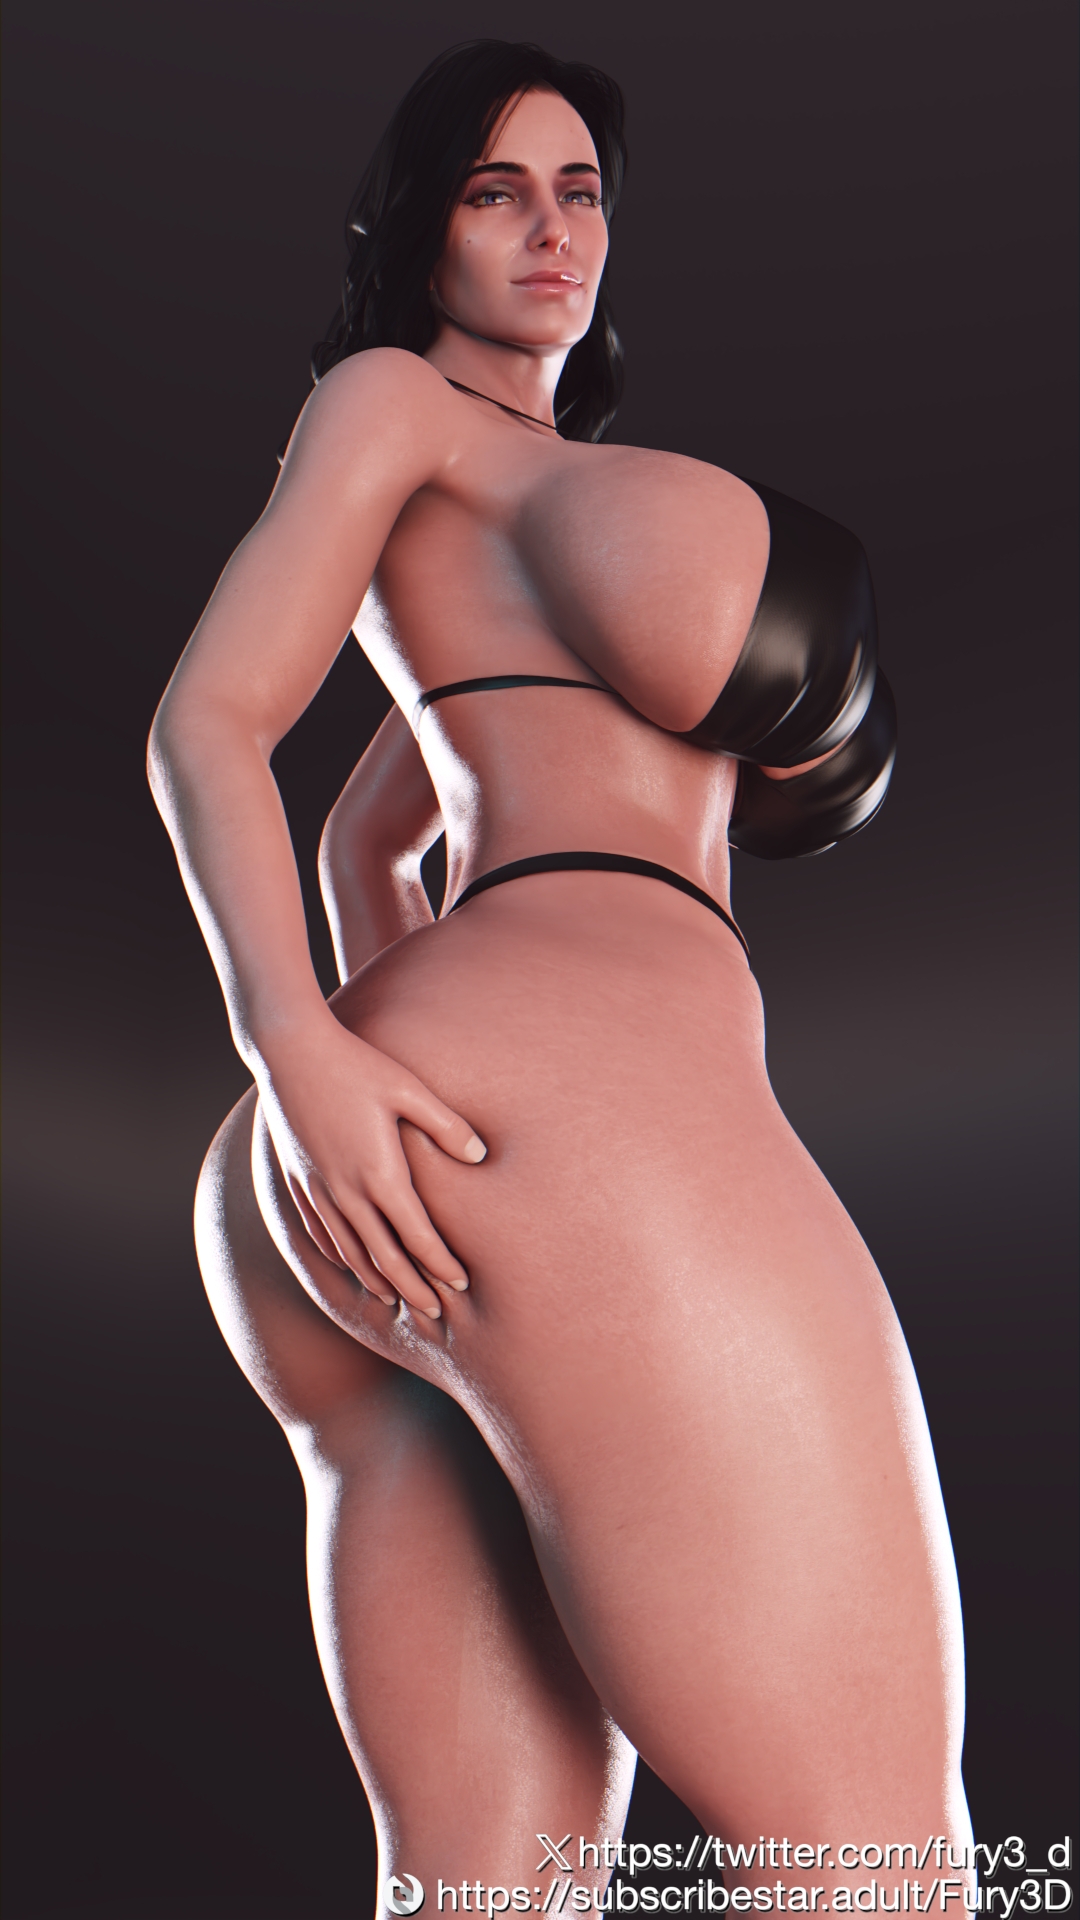 Yennefer The Witcher Yennefer di Vengerberg Yennefer (witcher) Thicc Huge Boobs Huge Ass Solo Pinup Bikini Nude 3d Porn 3